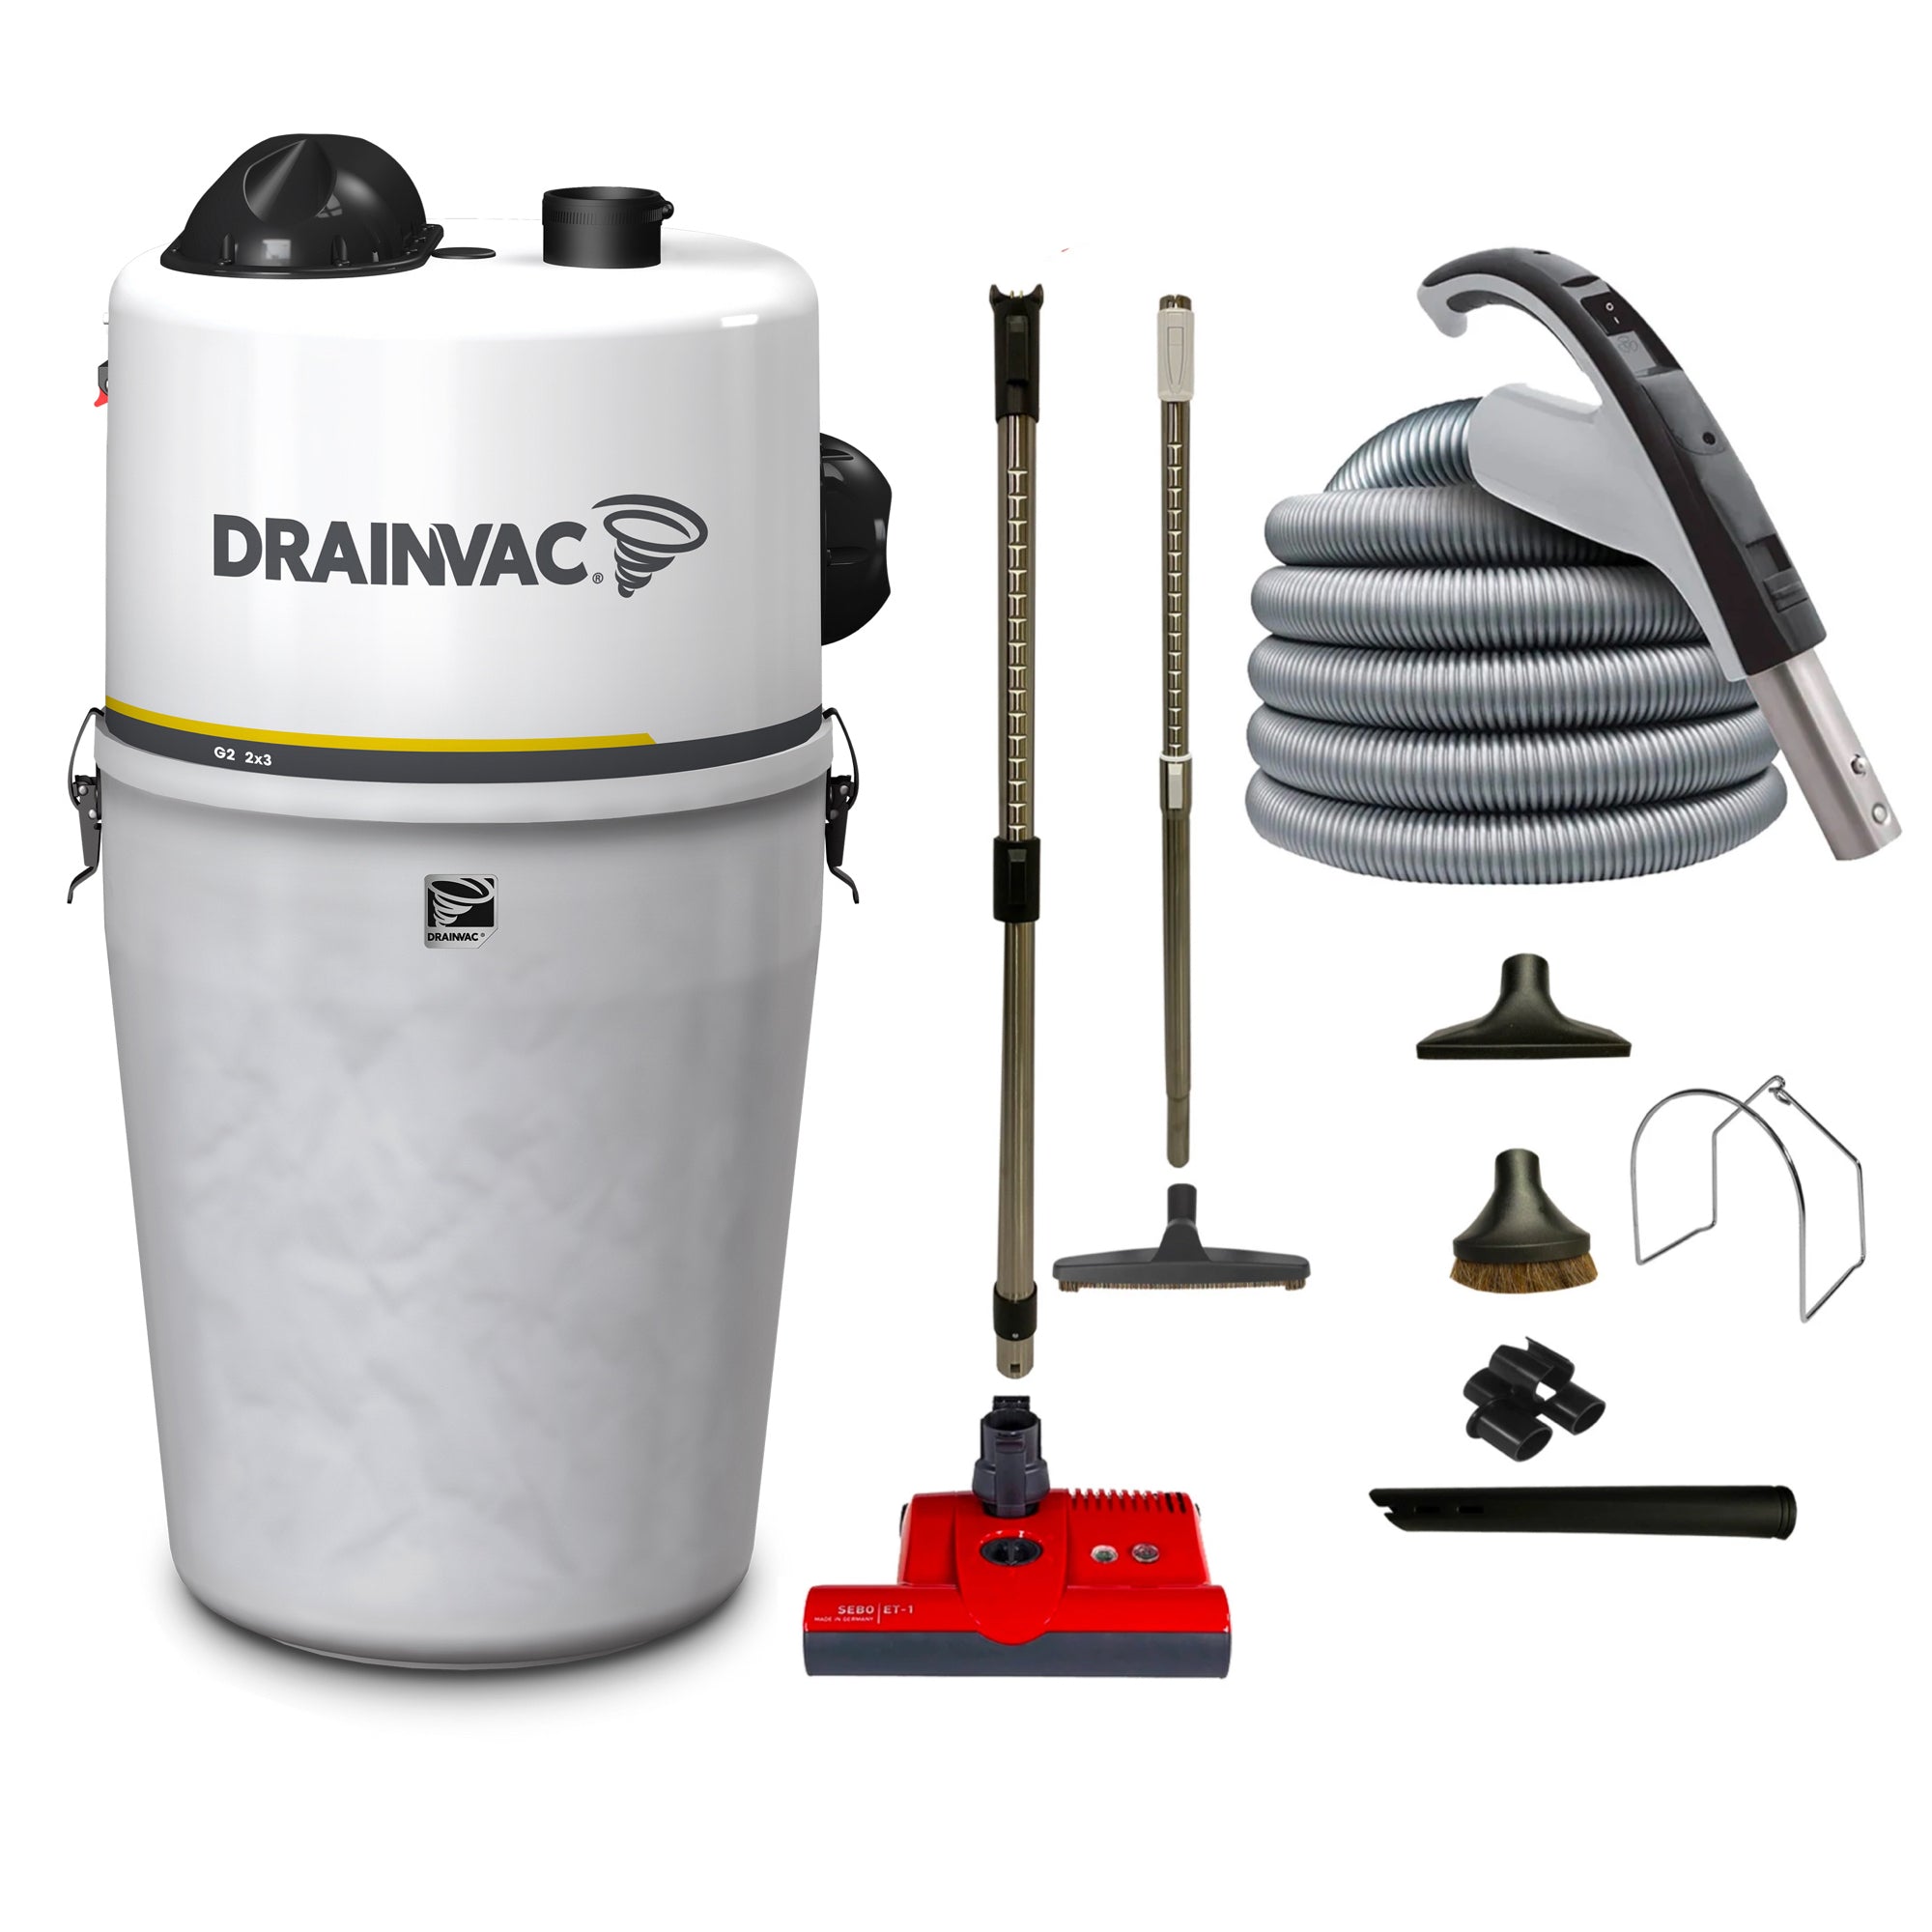 DrainVac Generation 2 Central Vacuum | Dual Motor 302 Air Watts with Muffler and SEBO ET-1 Electric Package